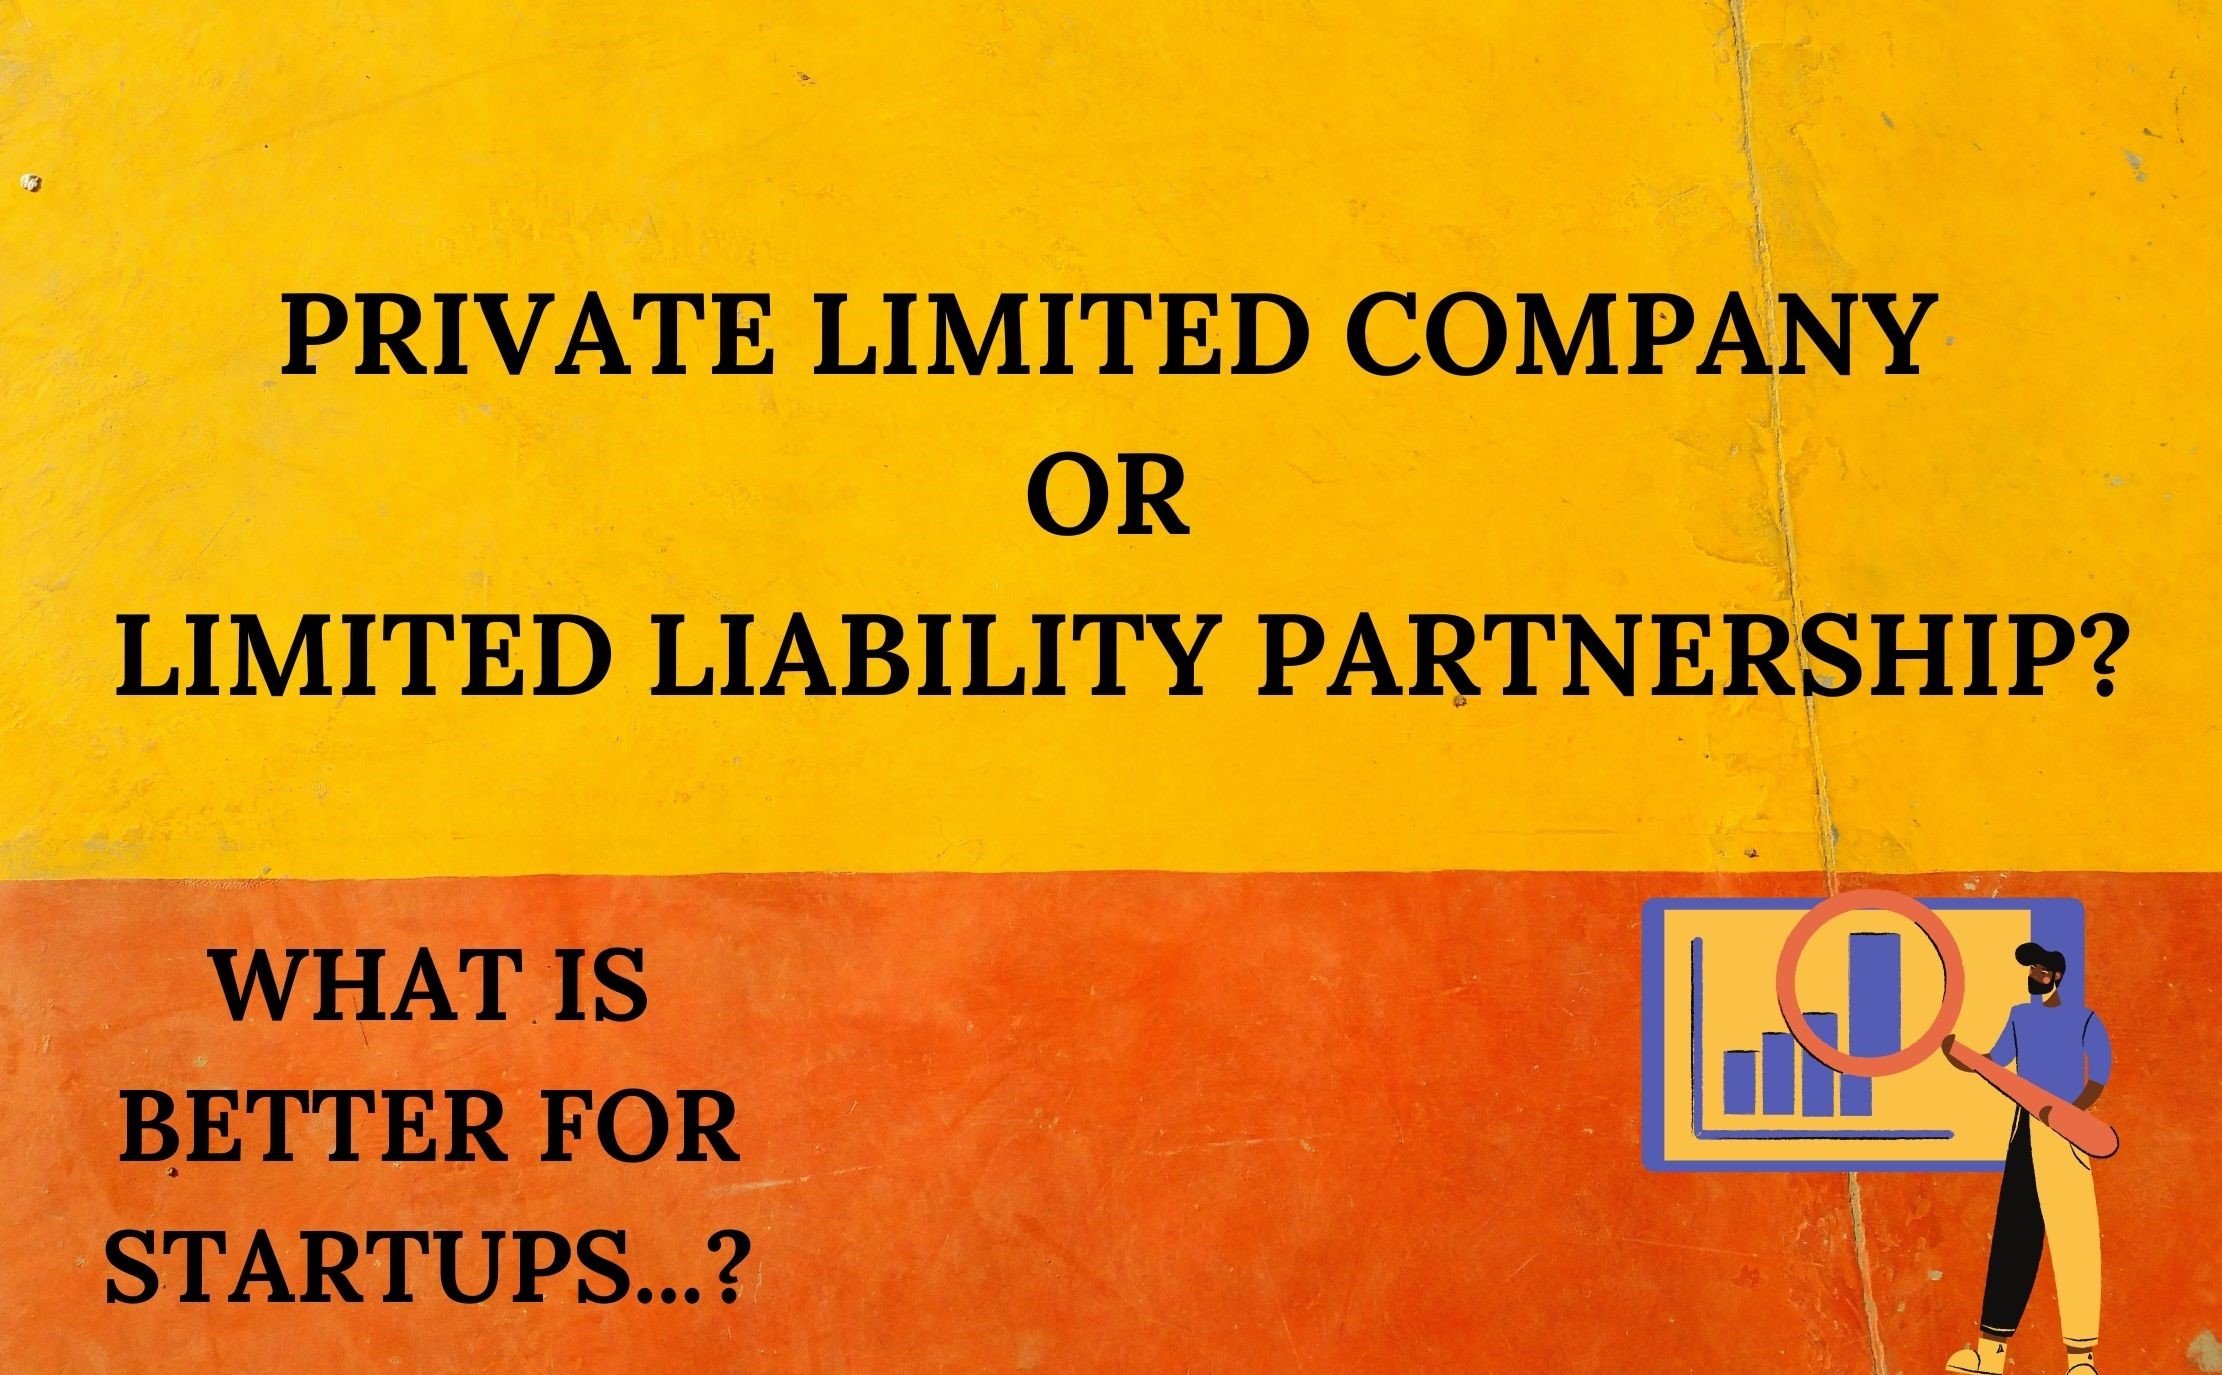 WHAT IS BETTER FOR STARTUPS: A PRIVATE LIMITED COMPANY OR LIMITED LIABILITY PARTNERSHIP?